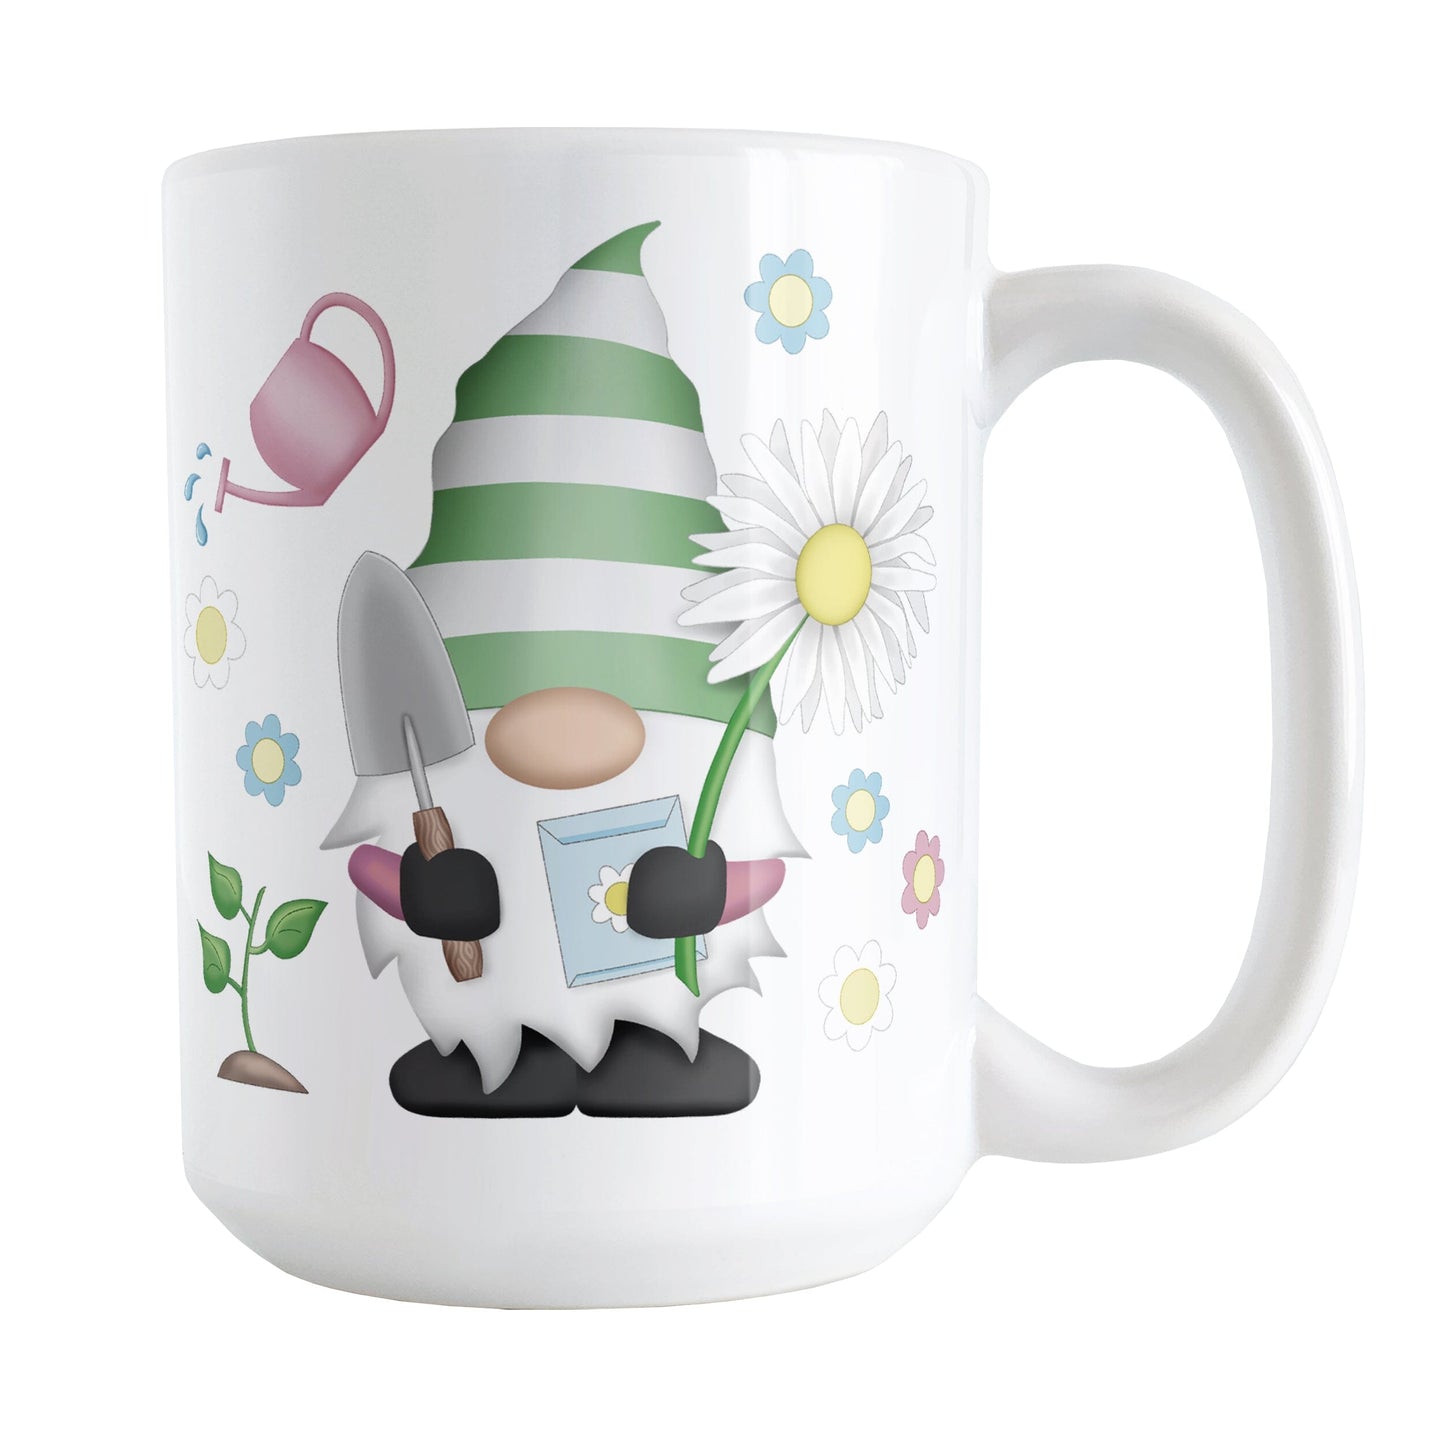 Spring Gardening Gnome Mug (15oz) at Amy's Coffee Mugs. A ceramic coffee mug designed with an adorable gnome in spring colors holding a gardening spade, seeds packet, and an oversized daisy, with a plant, watering can and flowers around him.